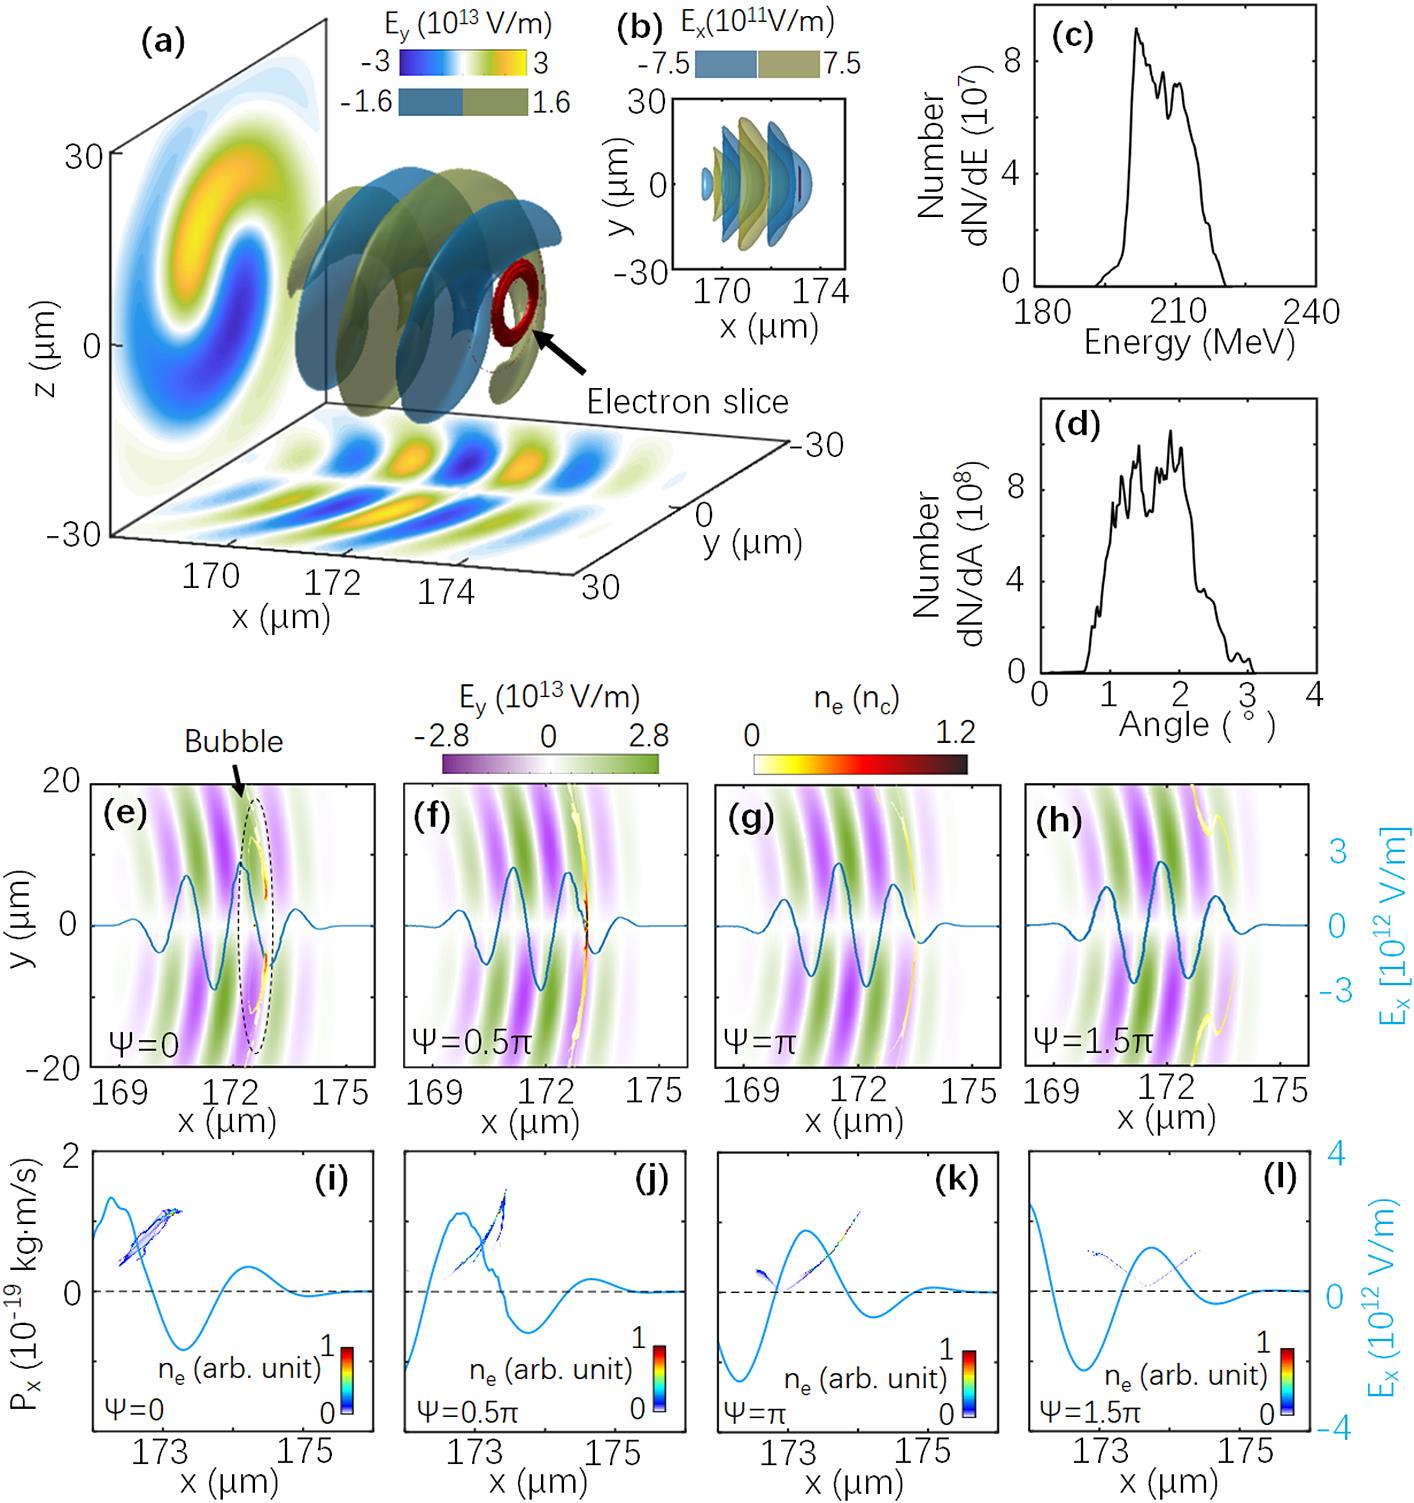 Electron slice and LG laser field in PIC simulation. (a) Sketch of an electron slice driven by an LG laser. The red donut indicates the isosurface of the electron slice with ne = 0.3nc for the carrier-envelope Ψ = 0. The blue and yellow translucence isosurfaces indicate the distributions of the LG laser field Ey. (b) Distributions of the laser electric field Ex and electron slice in the x–y plane. (c), (d) Energetic spectra and angular distribution for the electrons in the regions of 173 μm x r t = 88T. Density distributions of the electron slice for different CEPs (e) Ψ = 0, (f) 0.5π, (g) π and (h) 1.5π at 88T. Corresponding phase-space distributions of the electrons and amplitude of Ex (blue line) on the x-axis at t = 88T are plotted for (i) Ψ = 0, (j) 0.5π, (k) π and (l) 1.5π.